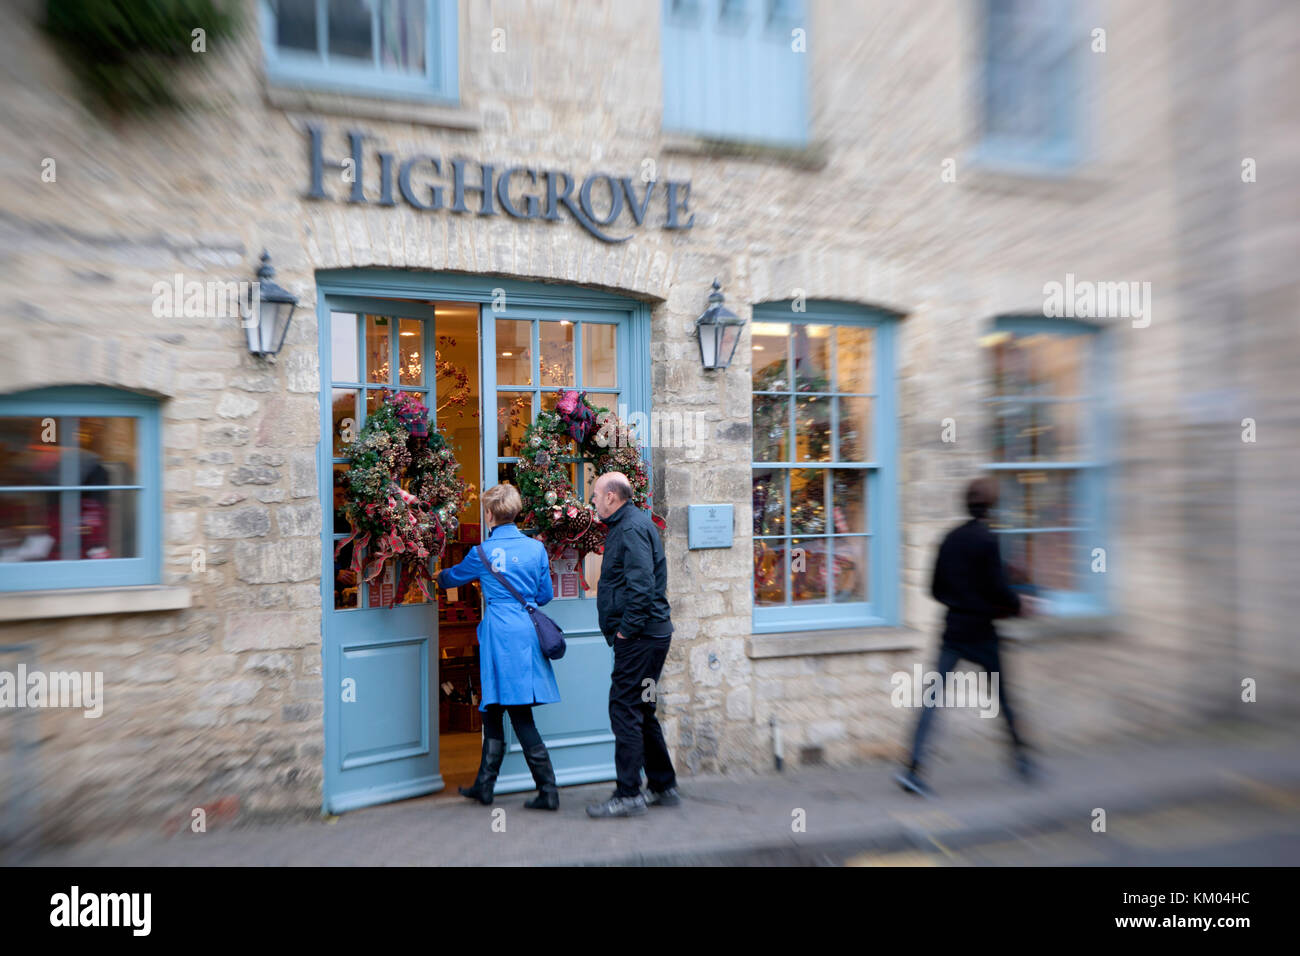 Christmas shoppers enter the Prince Charles Highgrove shop in the Cotswold town of Tetbury Stock Photo